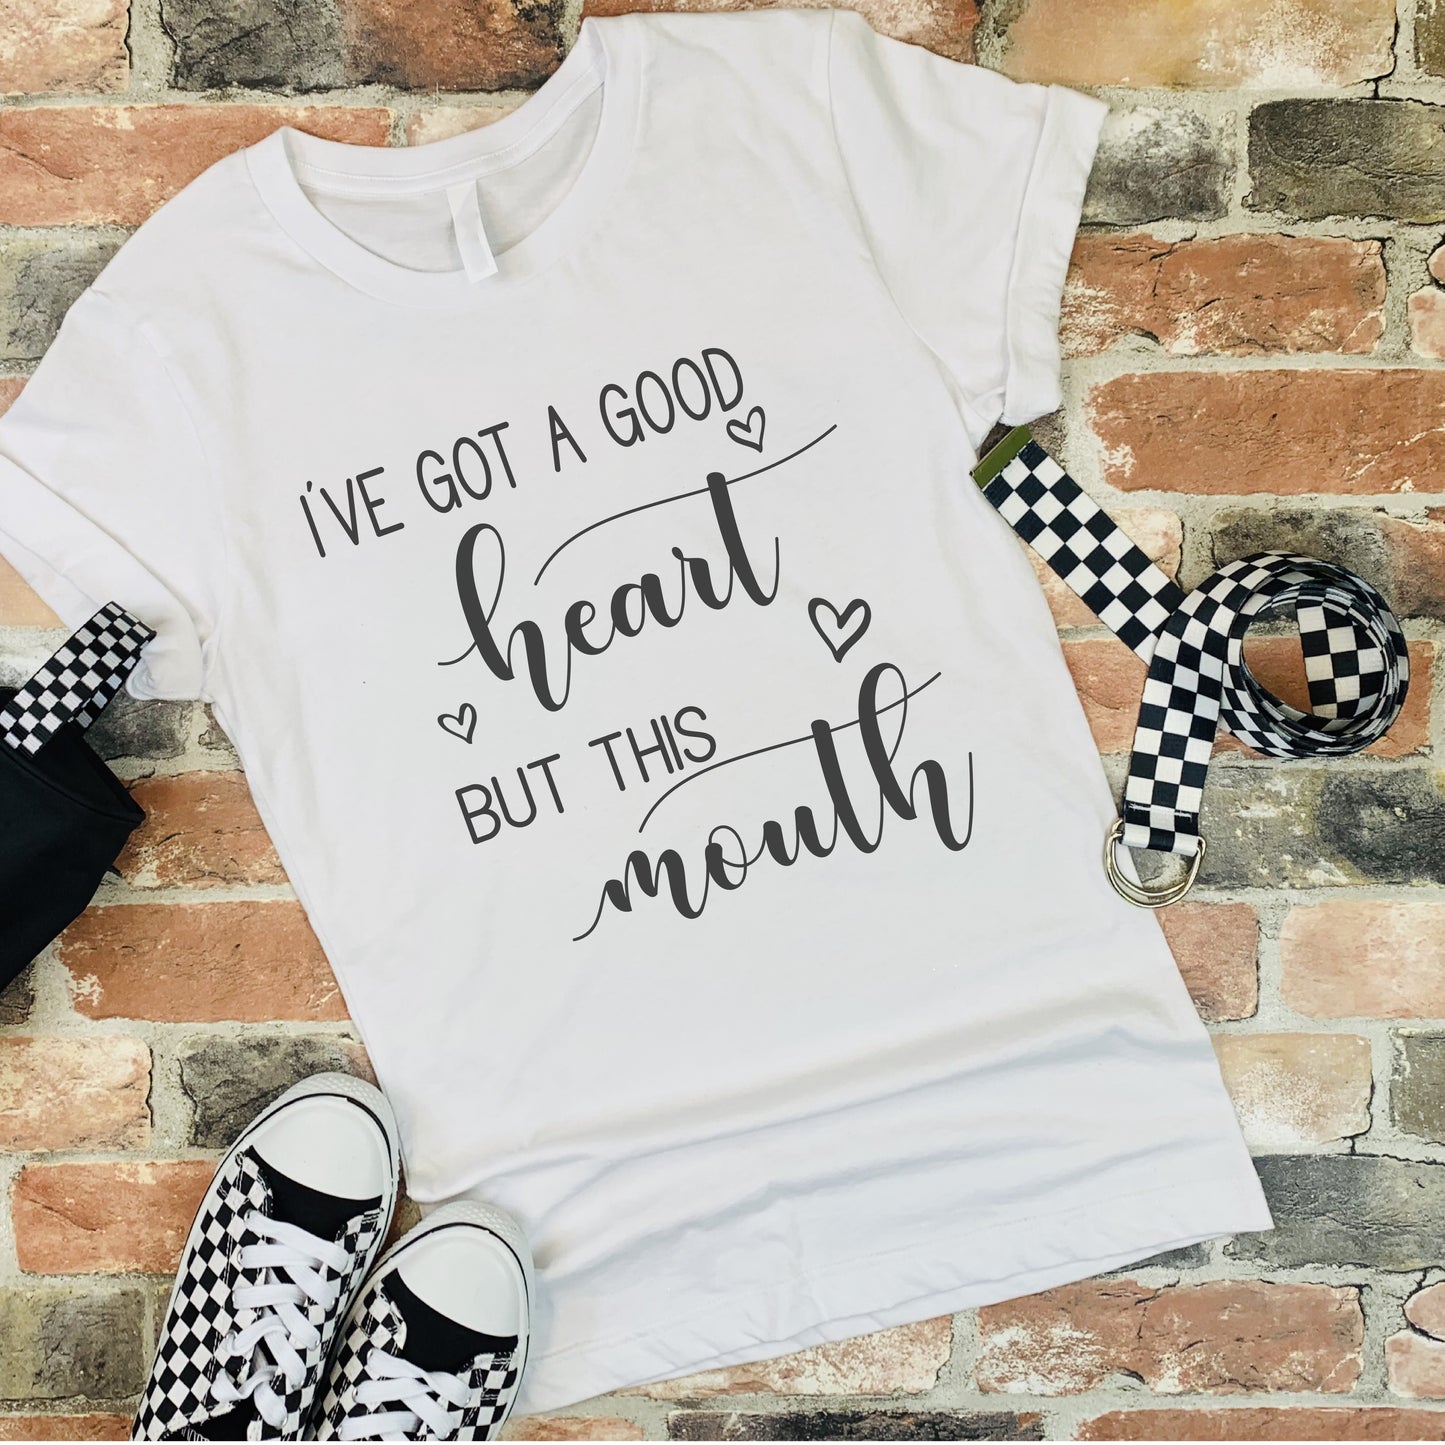 "Good Heart but this mouth" Tee